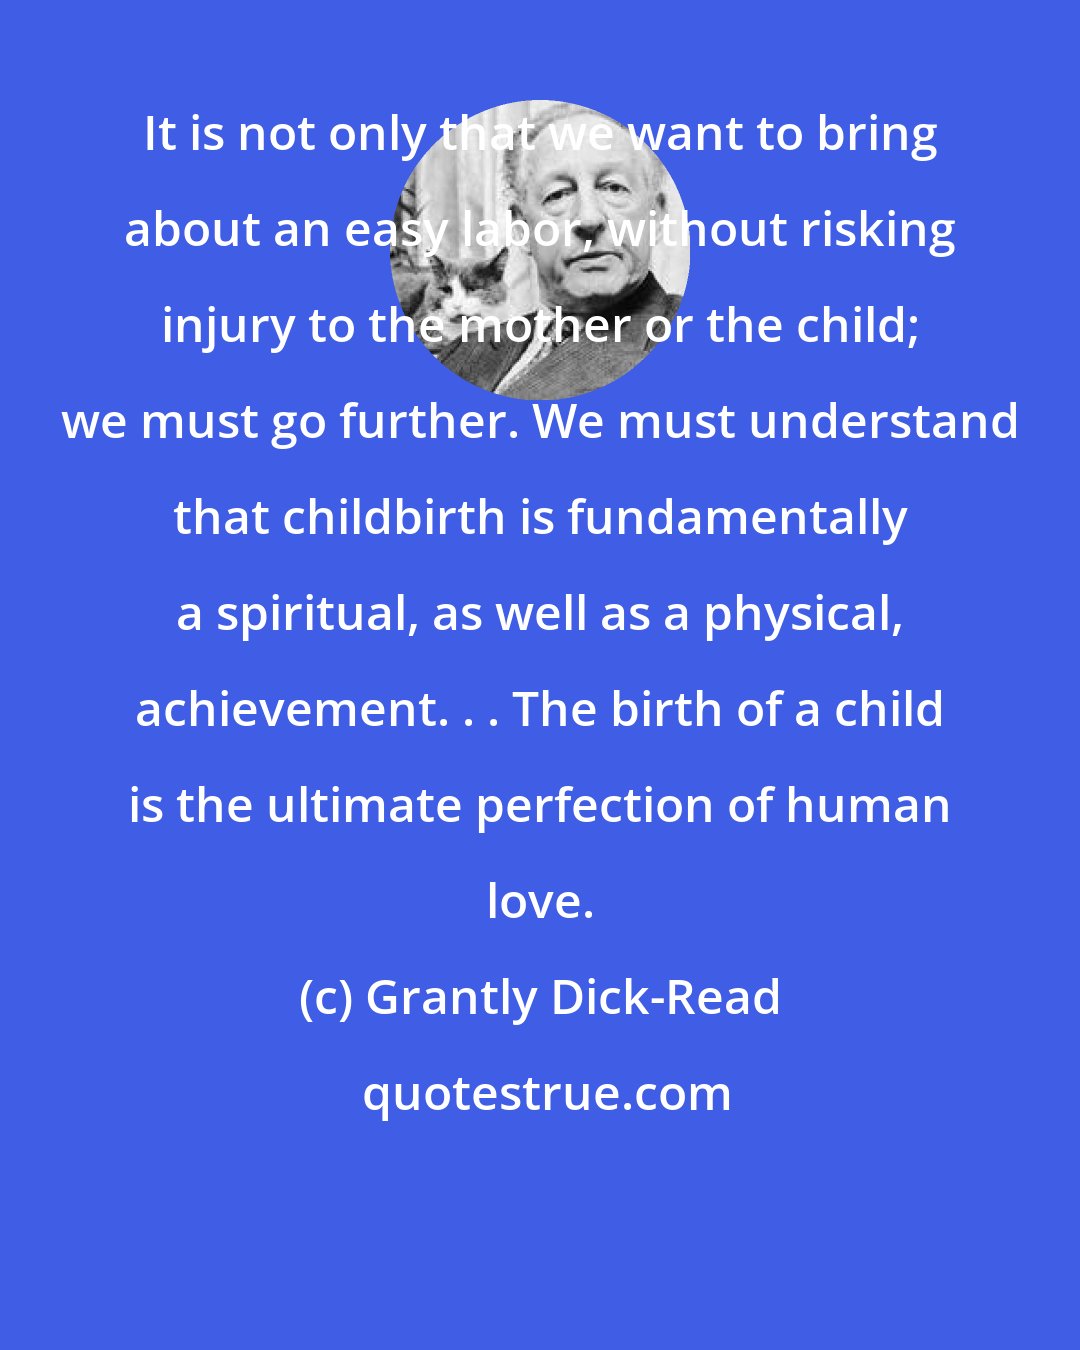 Grantly Dick-Read: It is not only that we want to bring about an easy labor, without risking injury to the mother or the child; we must go further. We must understand that childbirth is fundamentally a spiritual, as well as a physical, achievement. . . The birth of a child is the ultimate perfection of human love.